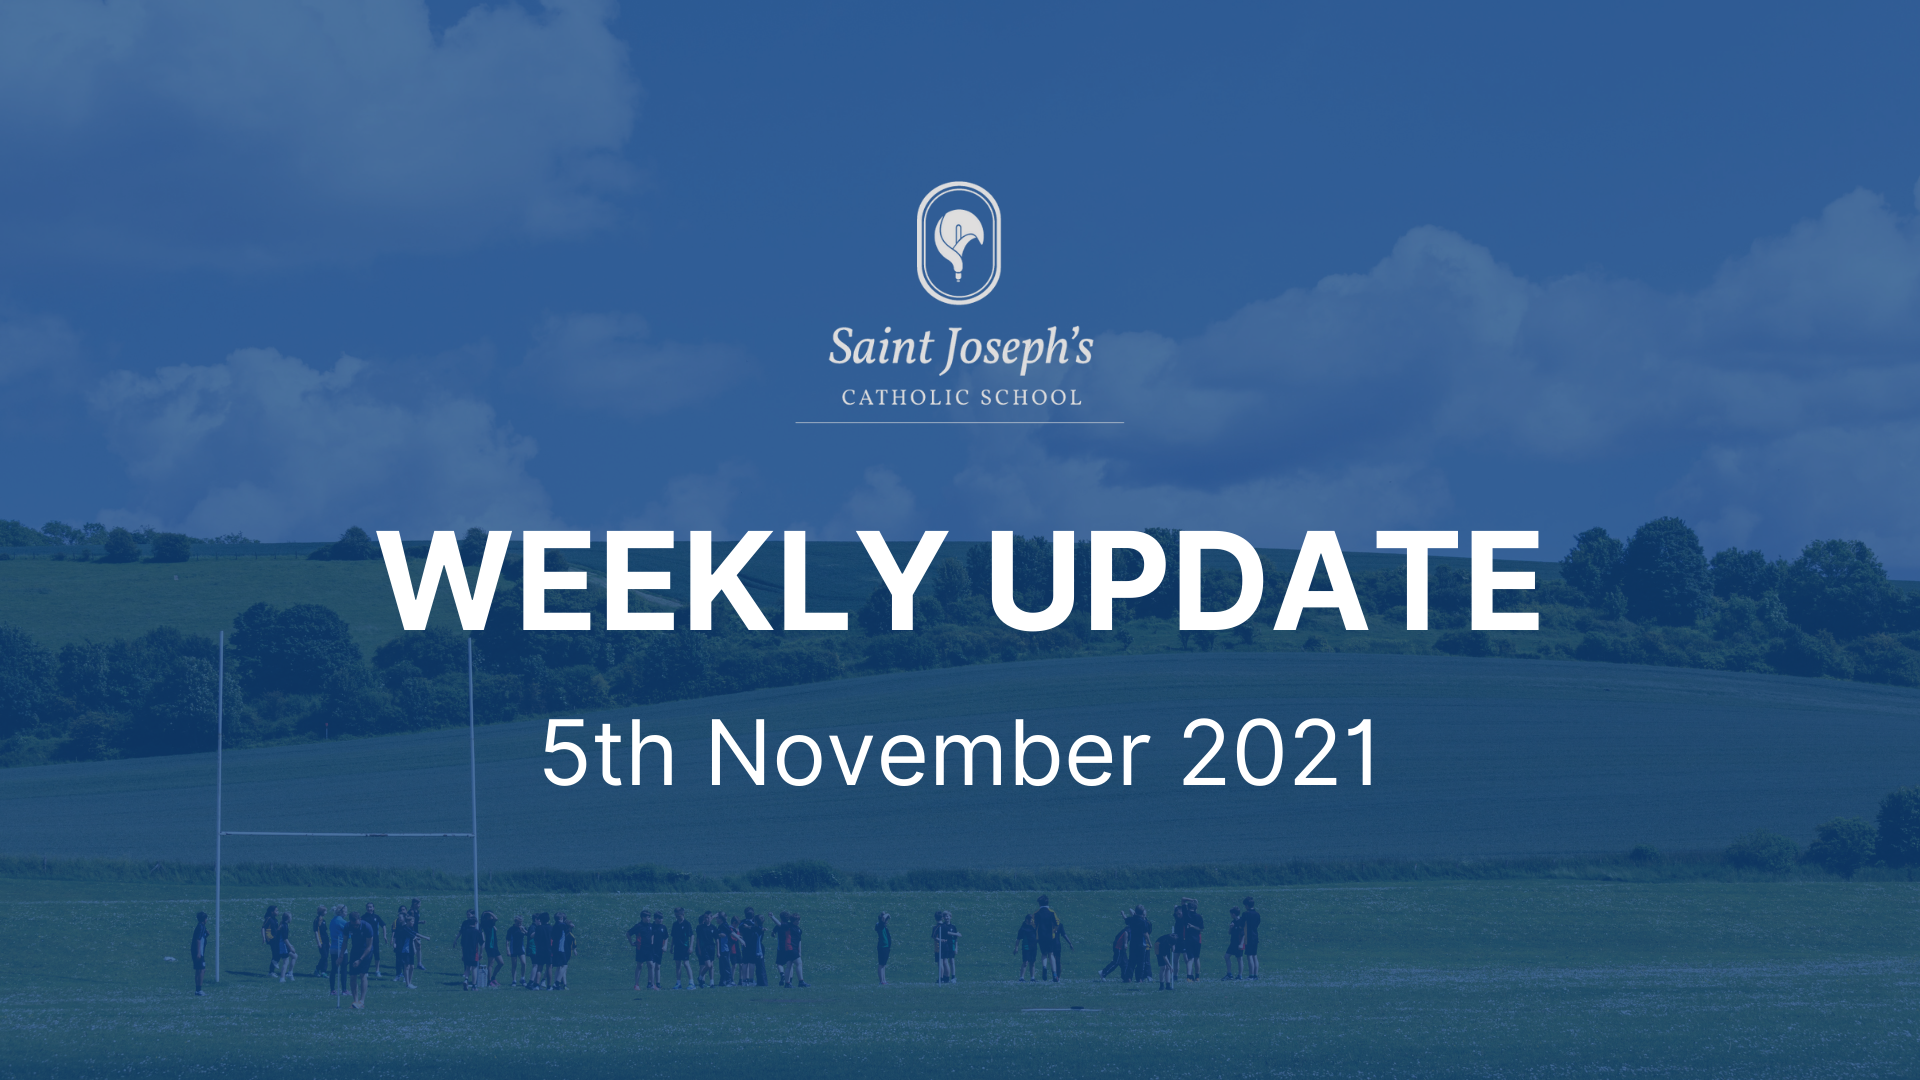 Featured image for “Weekly Update: 5th November 2021”